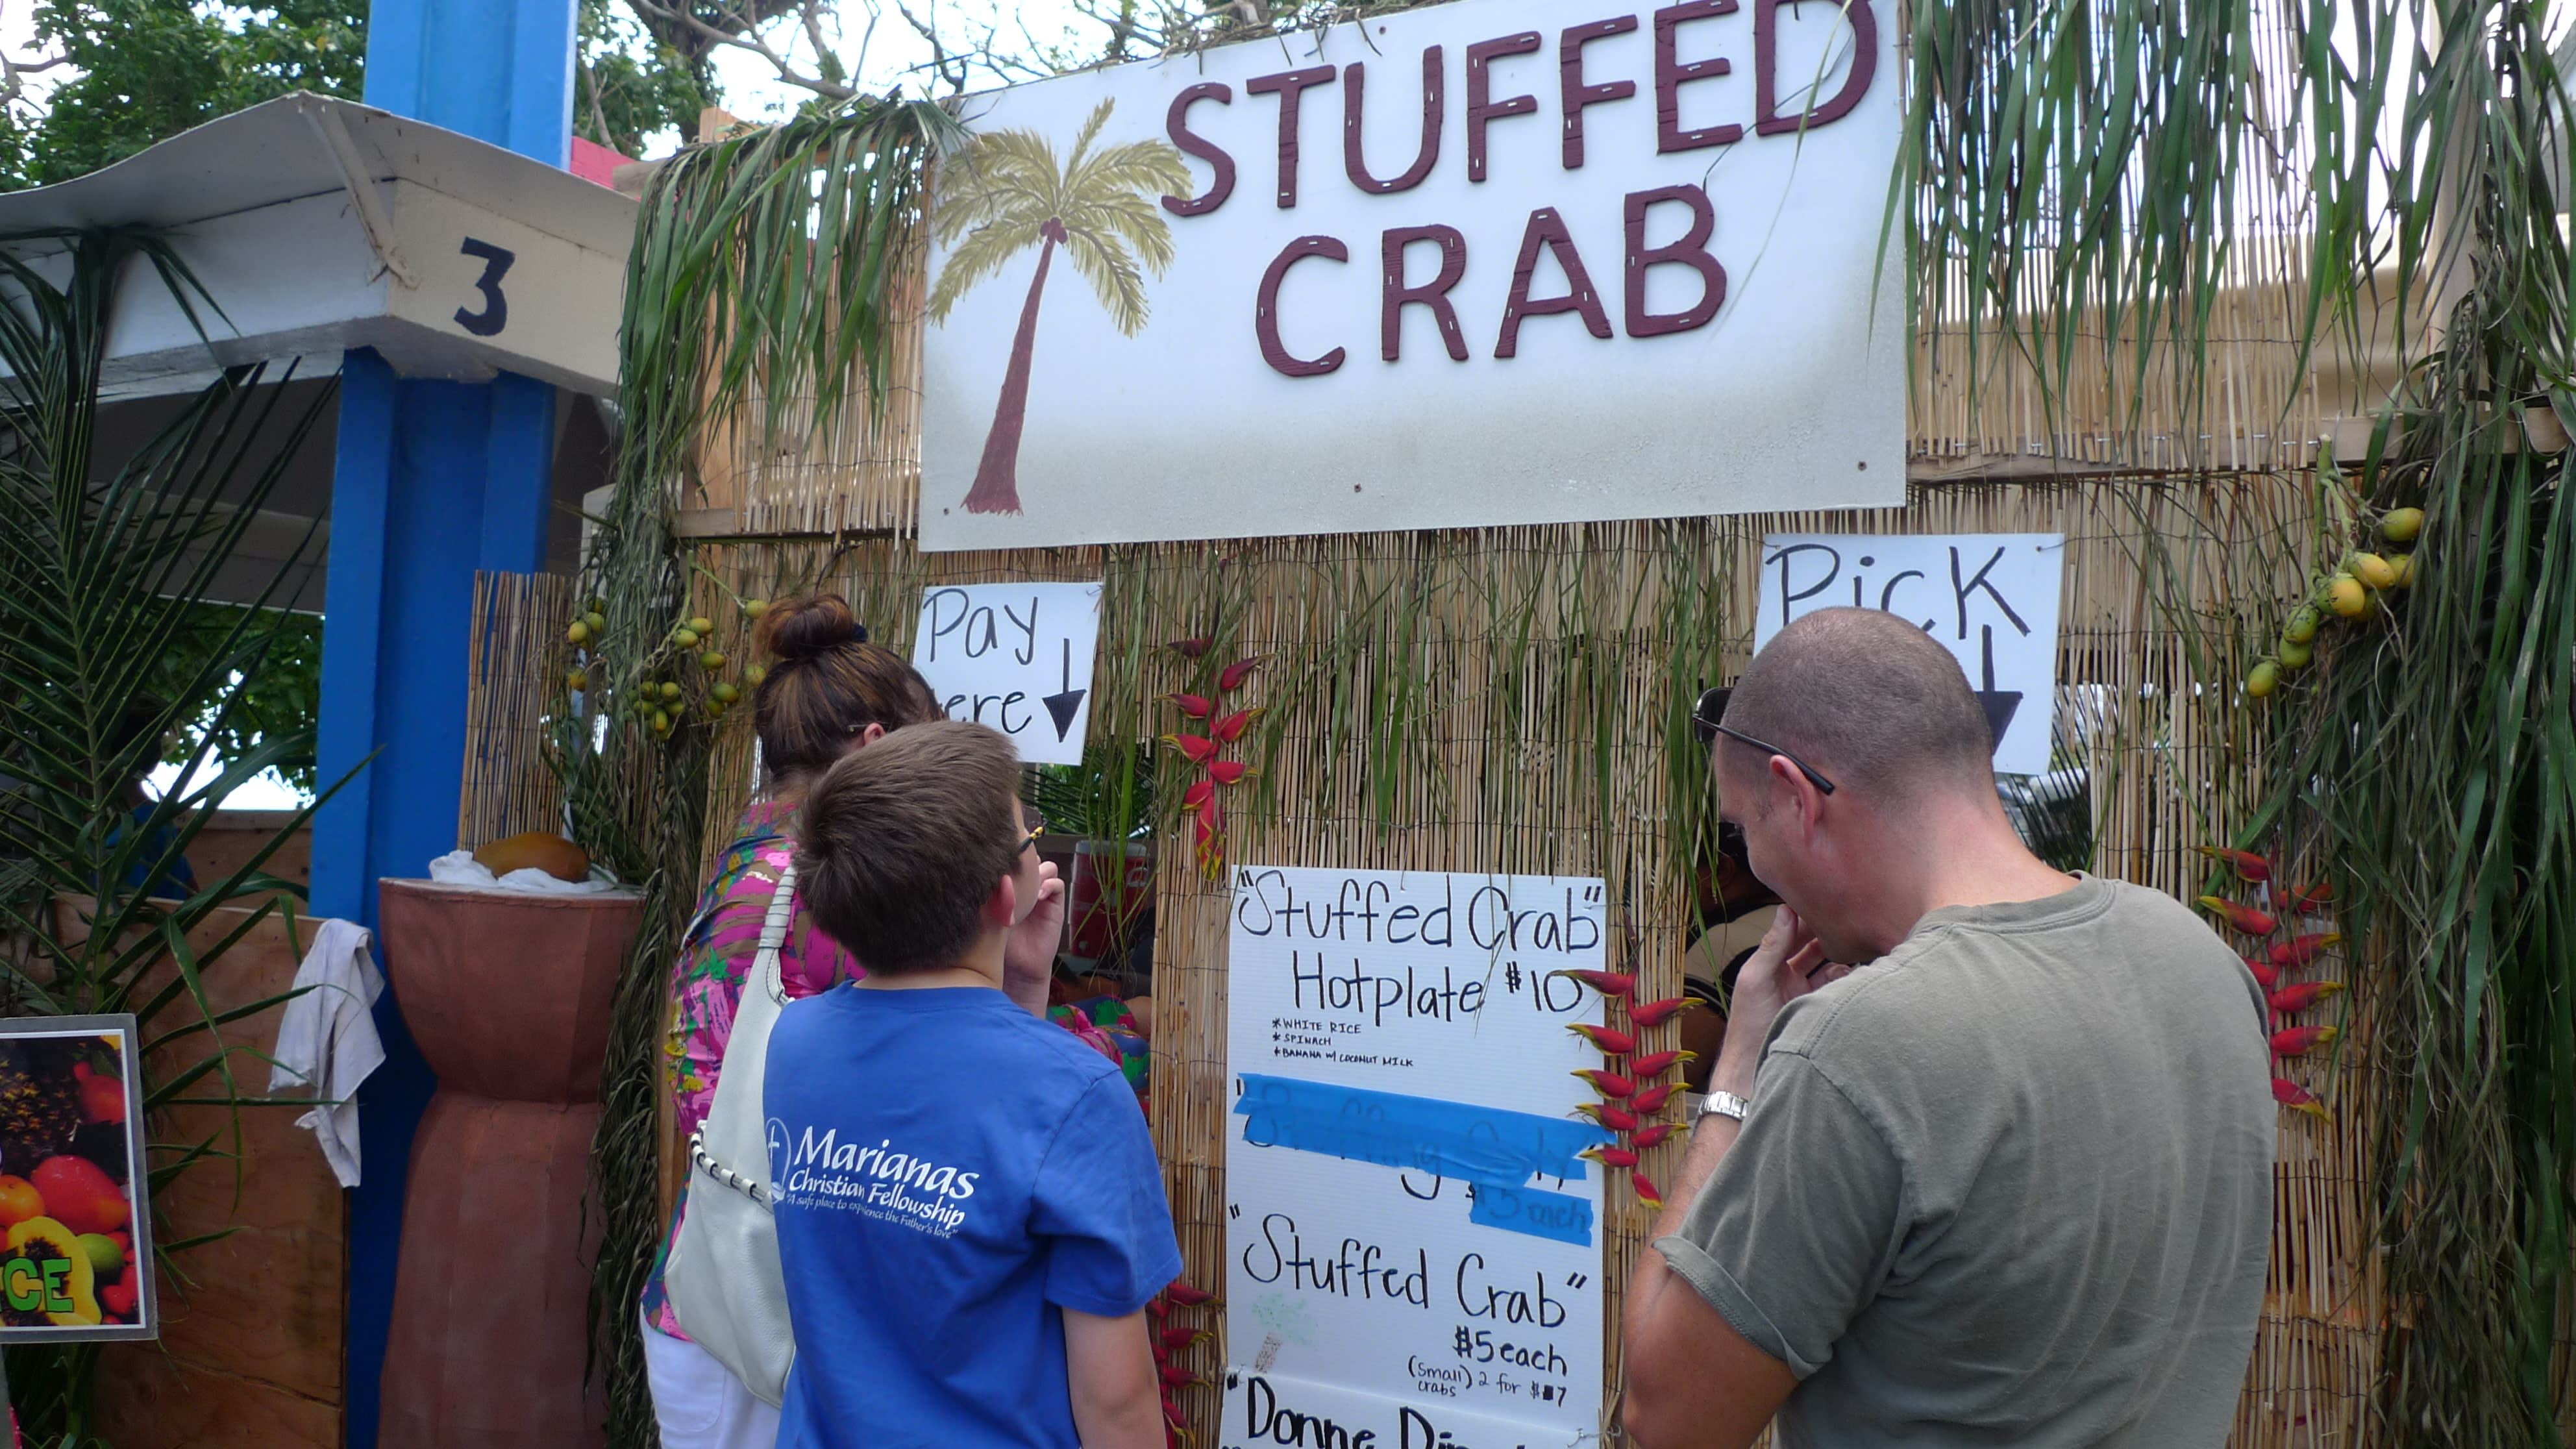 Stuffed Crab is one of the dishes offered during the Crab Festival